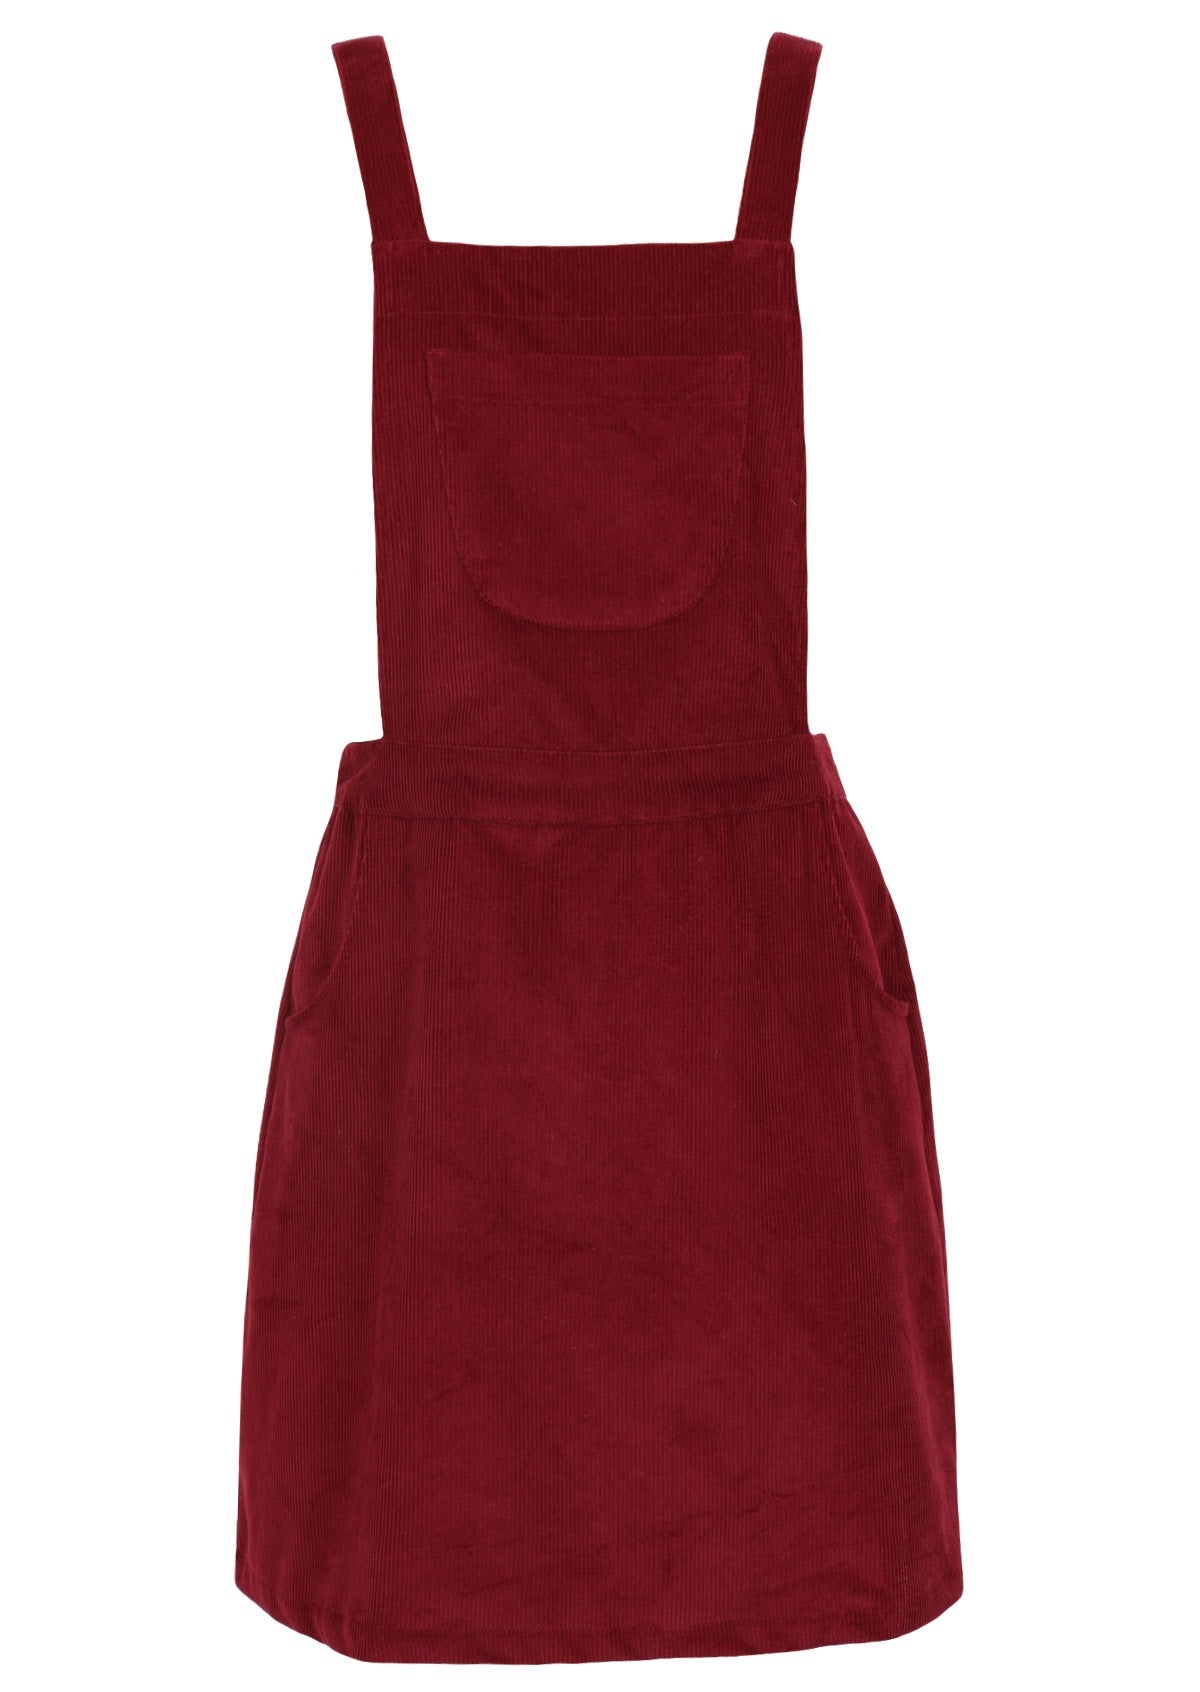 Rich red corduroy pinafore has side pockets and an additional pocket on the bib. 